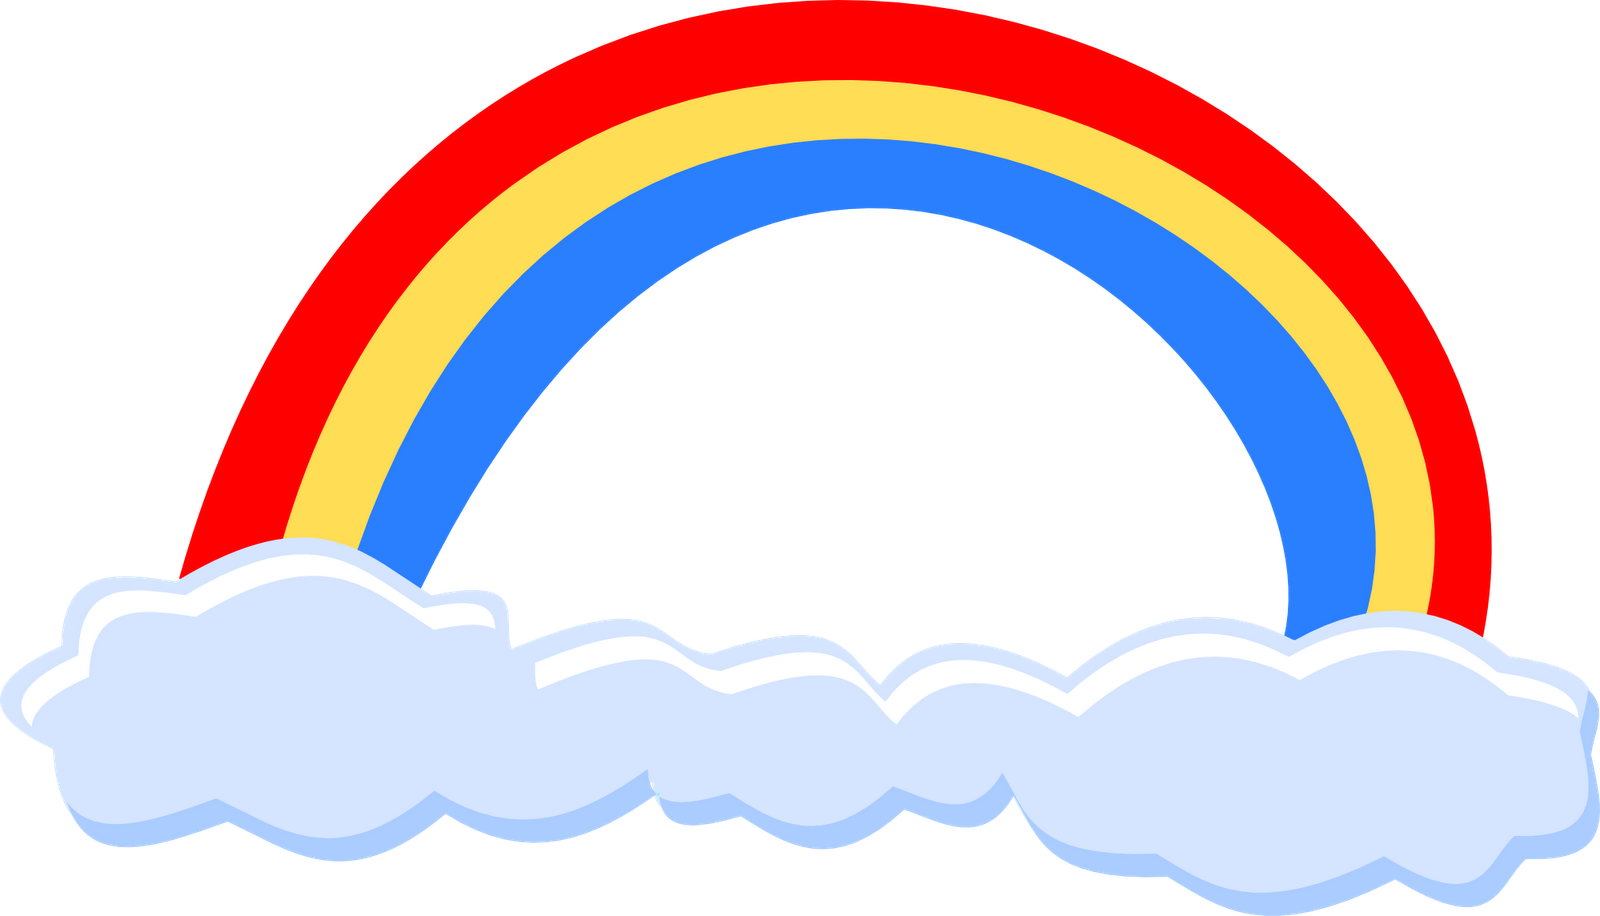 A Rainbow With Clouds In The Sky